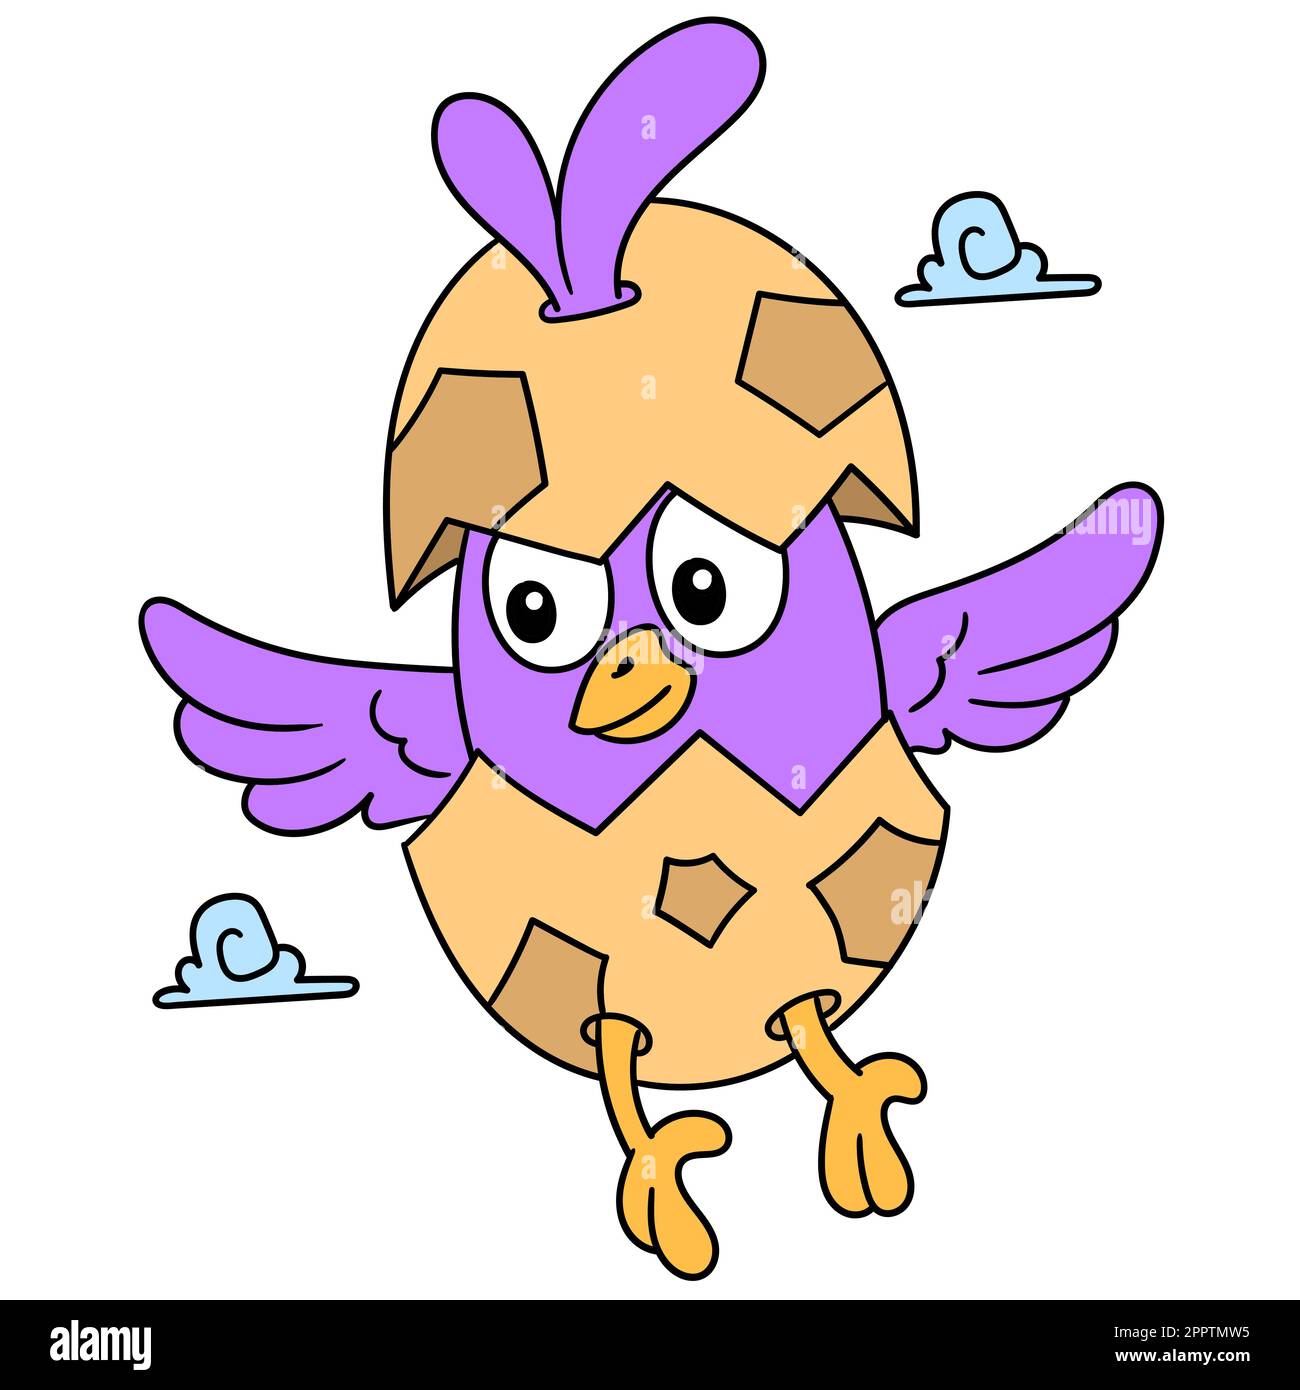 The newly hatched chicks fly around the sky, doodle icon image kawaii Stock Vector